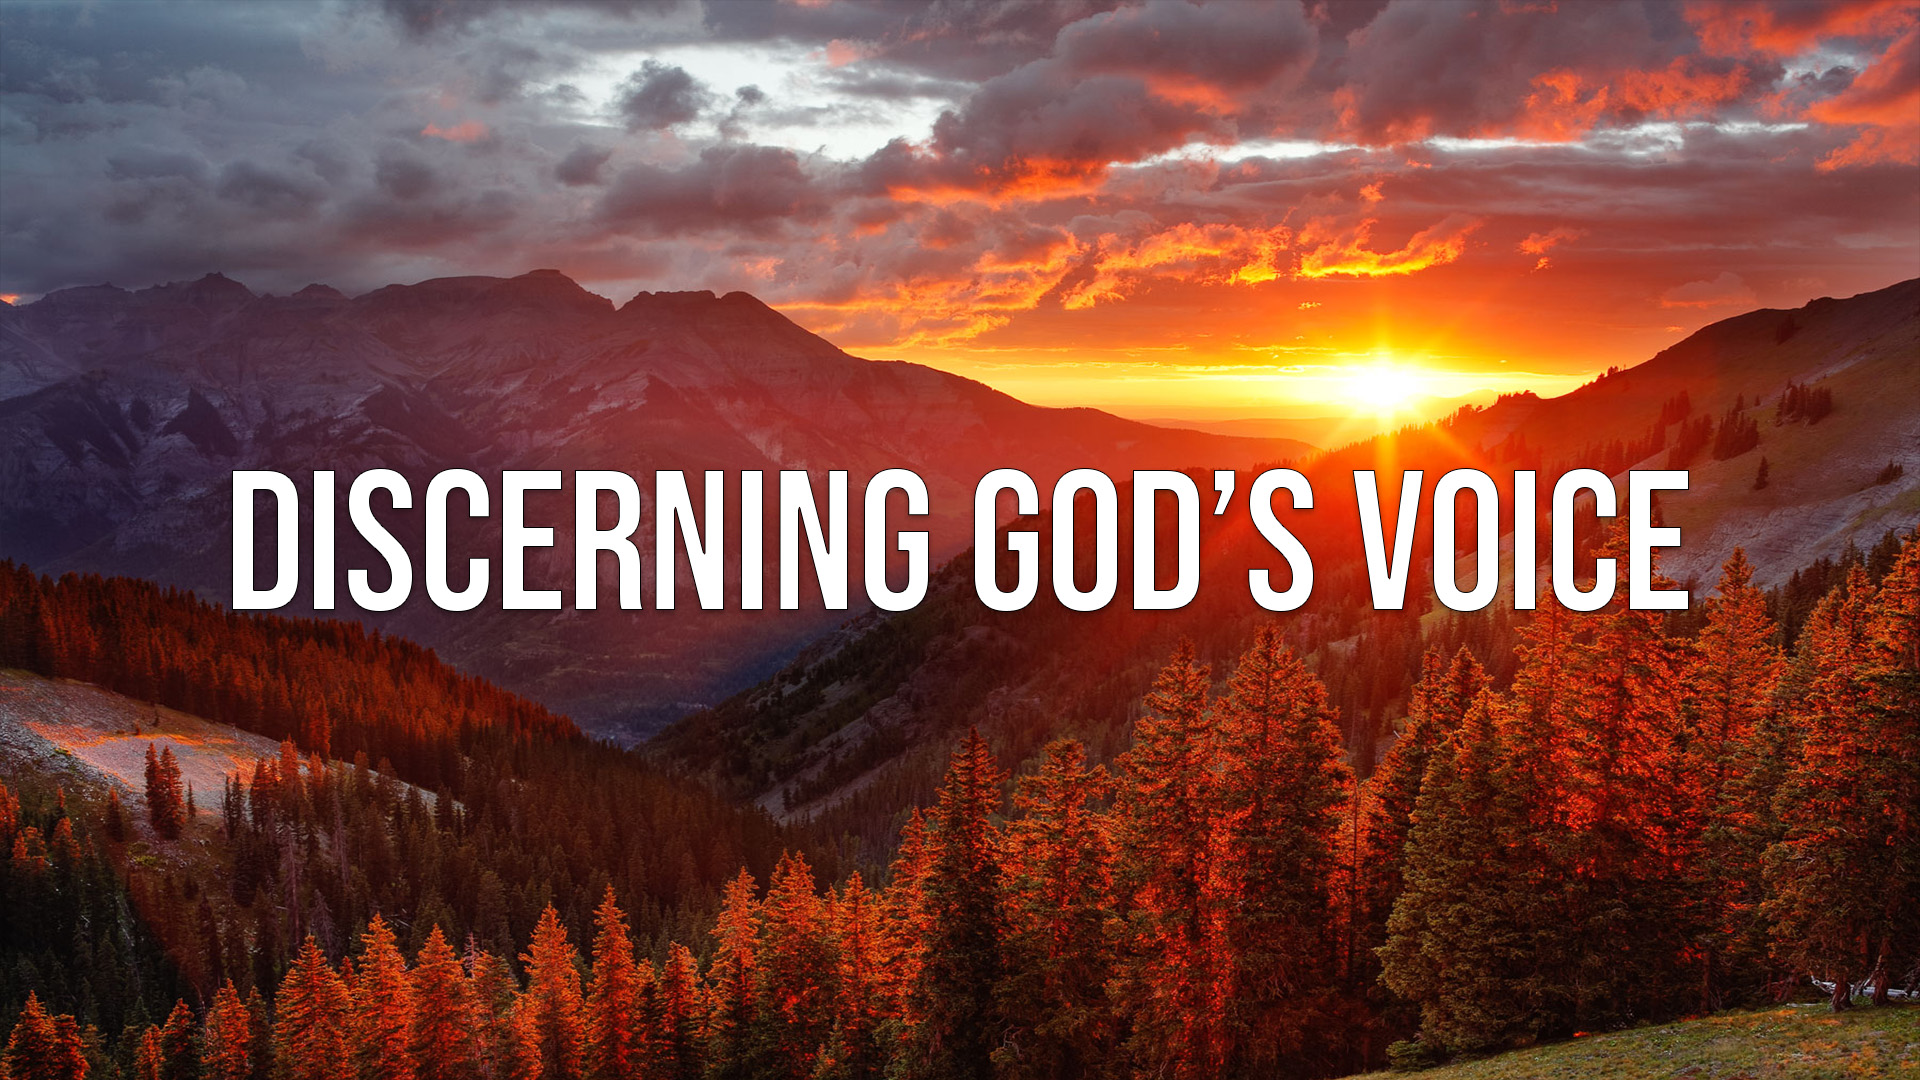 Discerning The Voice of God - Starts With Knowing His Heart